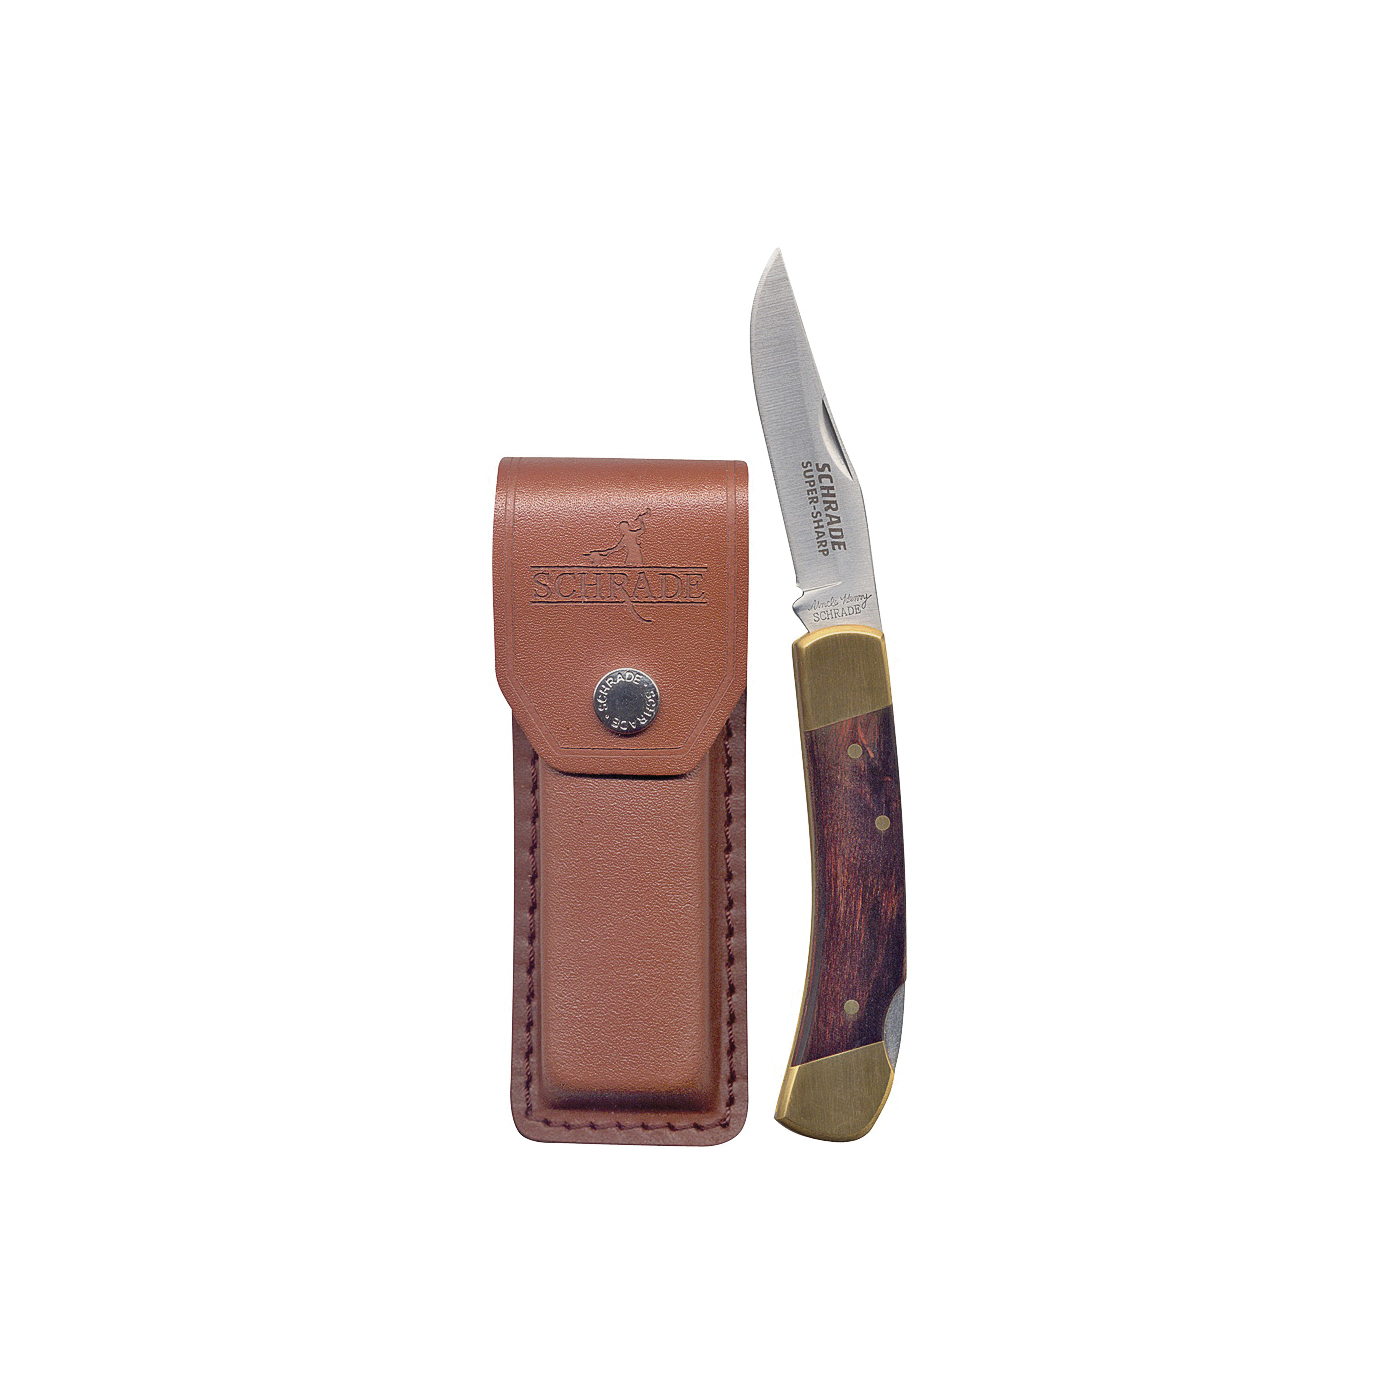 LB5 Pocket Knife, 2.8 in L Blade, 7Cr17 High Carbon Stainless Steel Blade, 1-Blade